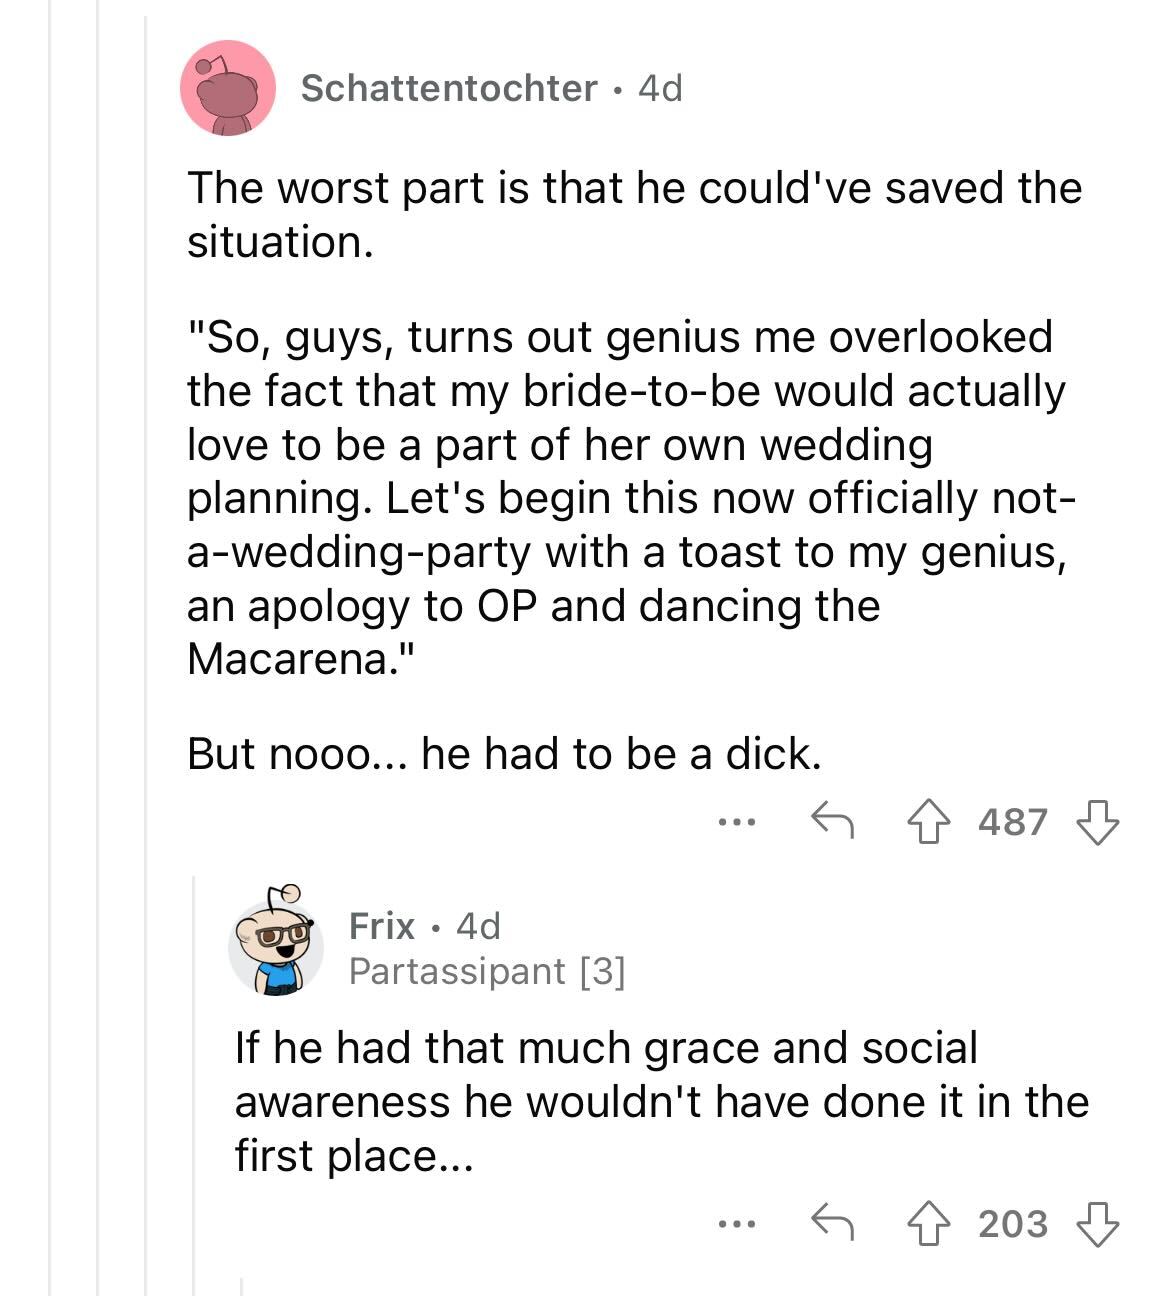 am i the asshole thread on reddit - document - Schattentochter 4d The worst part is that he could've saved the situation. "So, guys, turns out genius me overlooked the fact that my bridetobe would actually love to be a part of her own wedding planning. Le